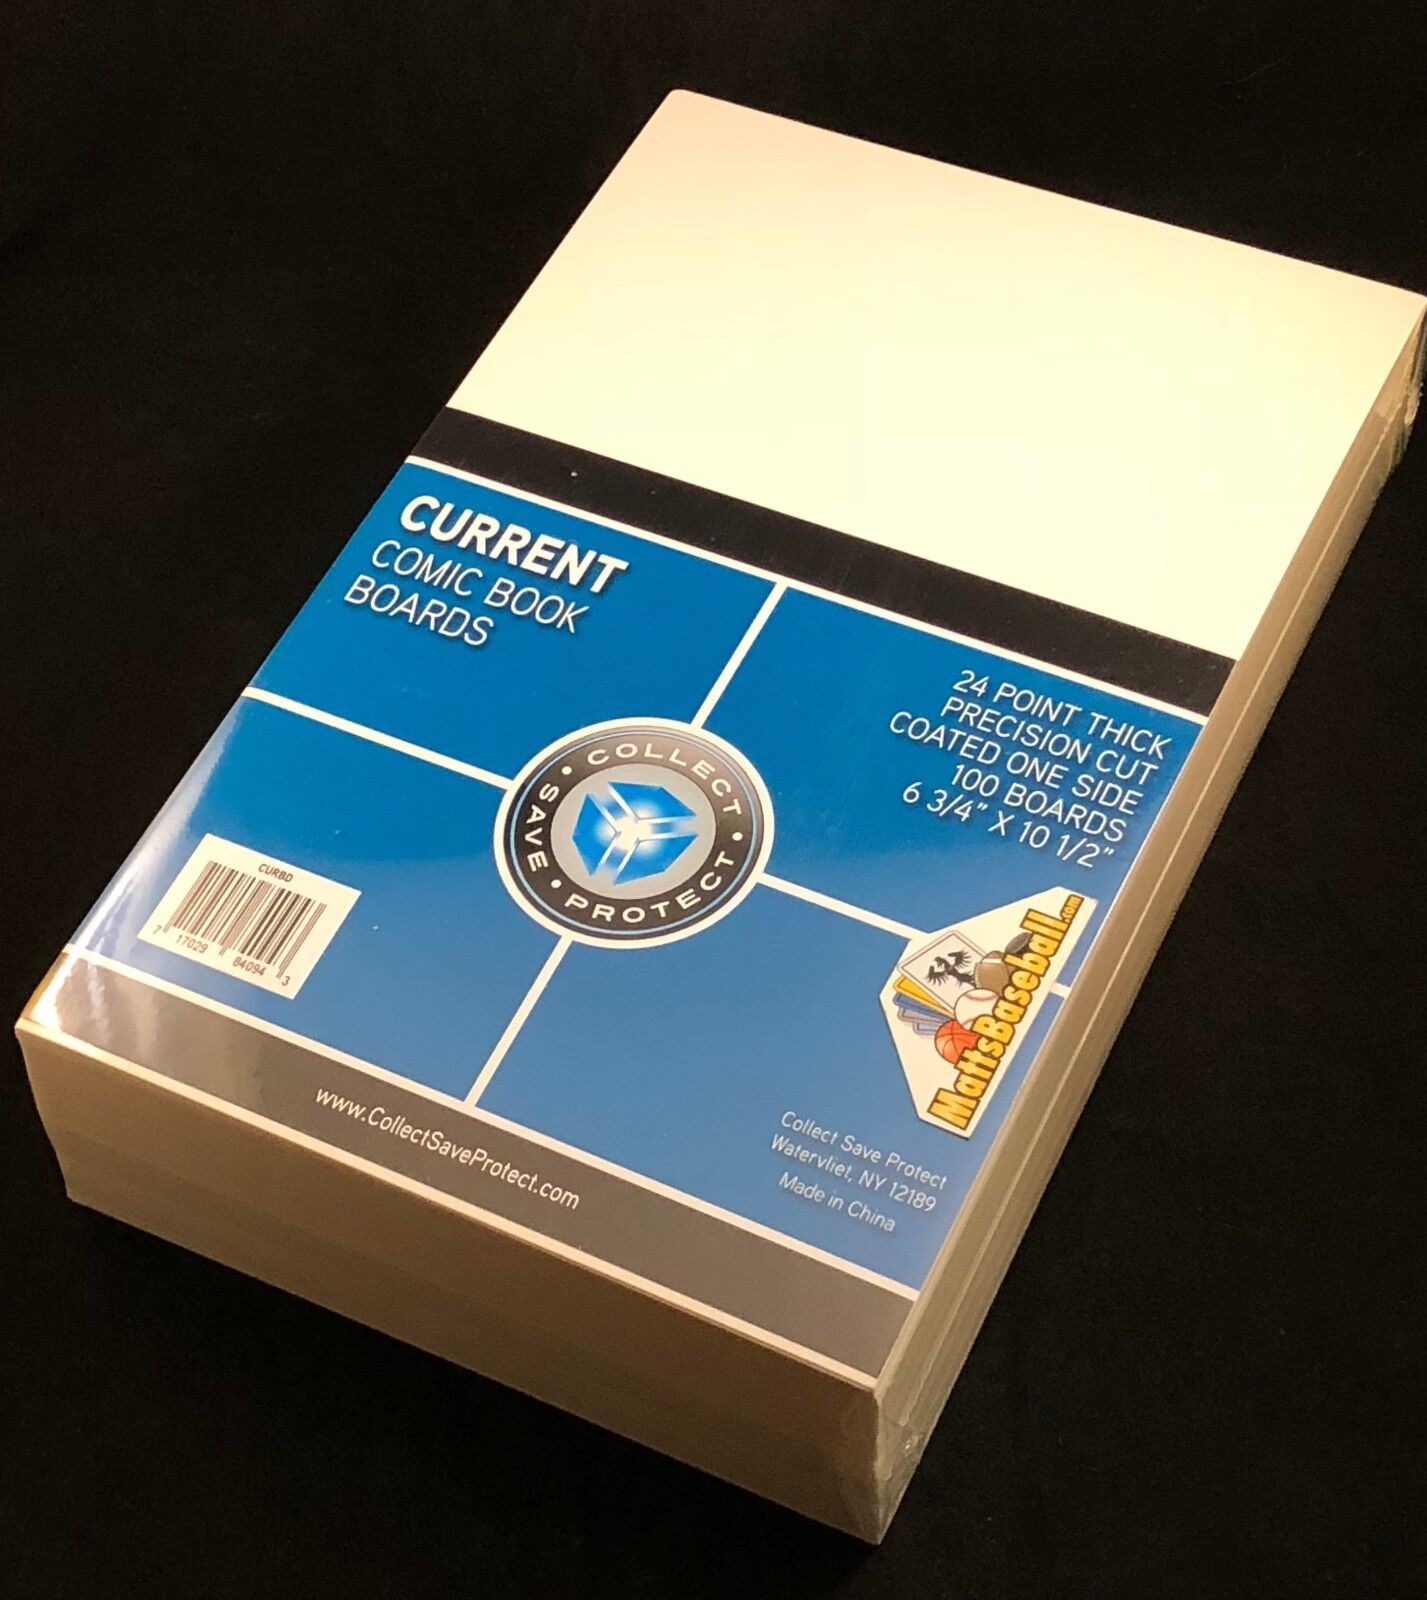 200 NEW CSP Current THICK Comic Bags and Boards Modern Archival Book Storage